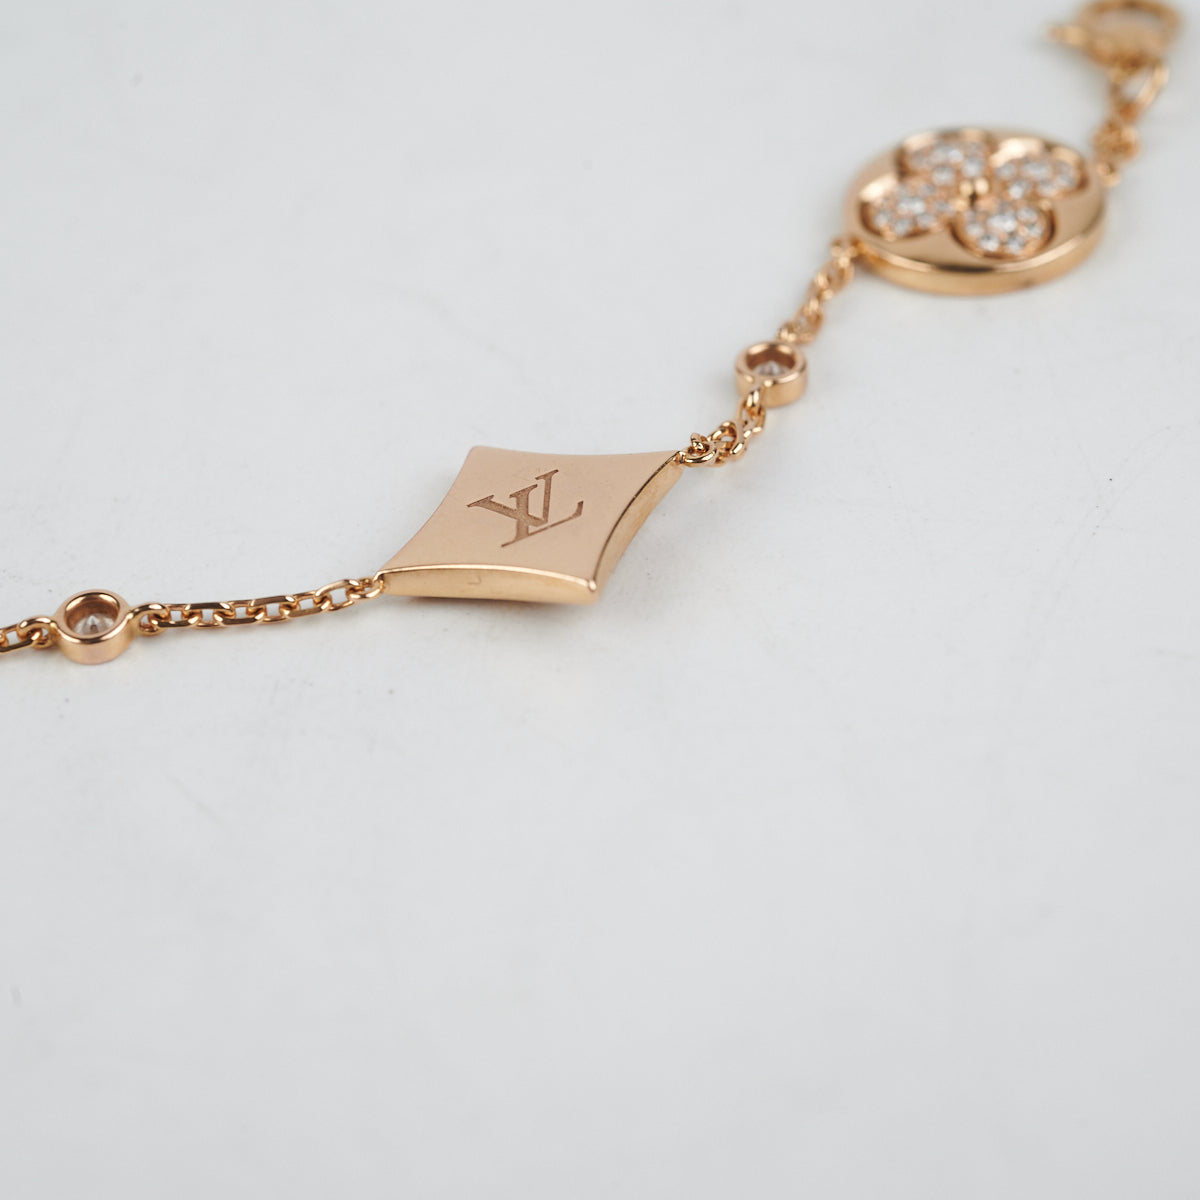 Louis Vuitton® Idylle Blossom Bracelet, Pink Gold And Diamonds Pink Gold.  Size Nsa